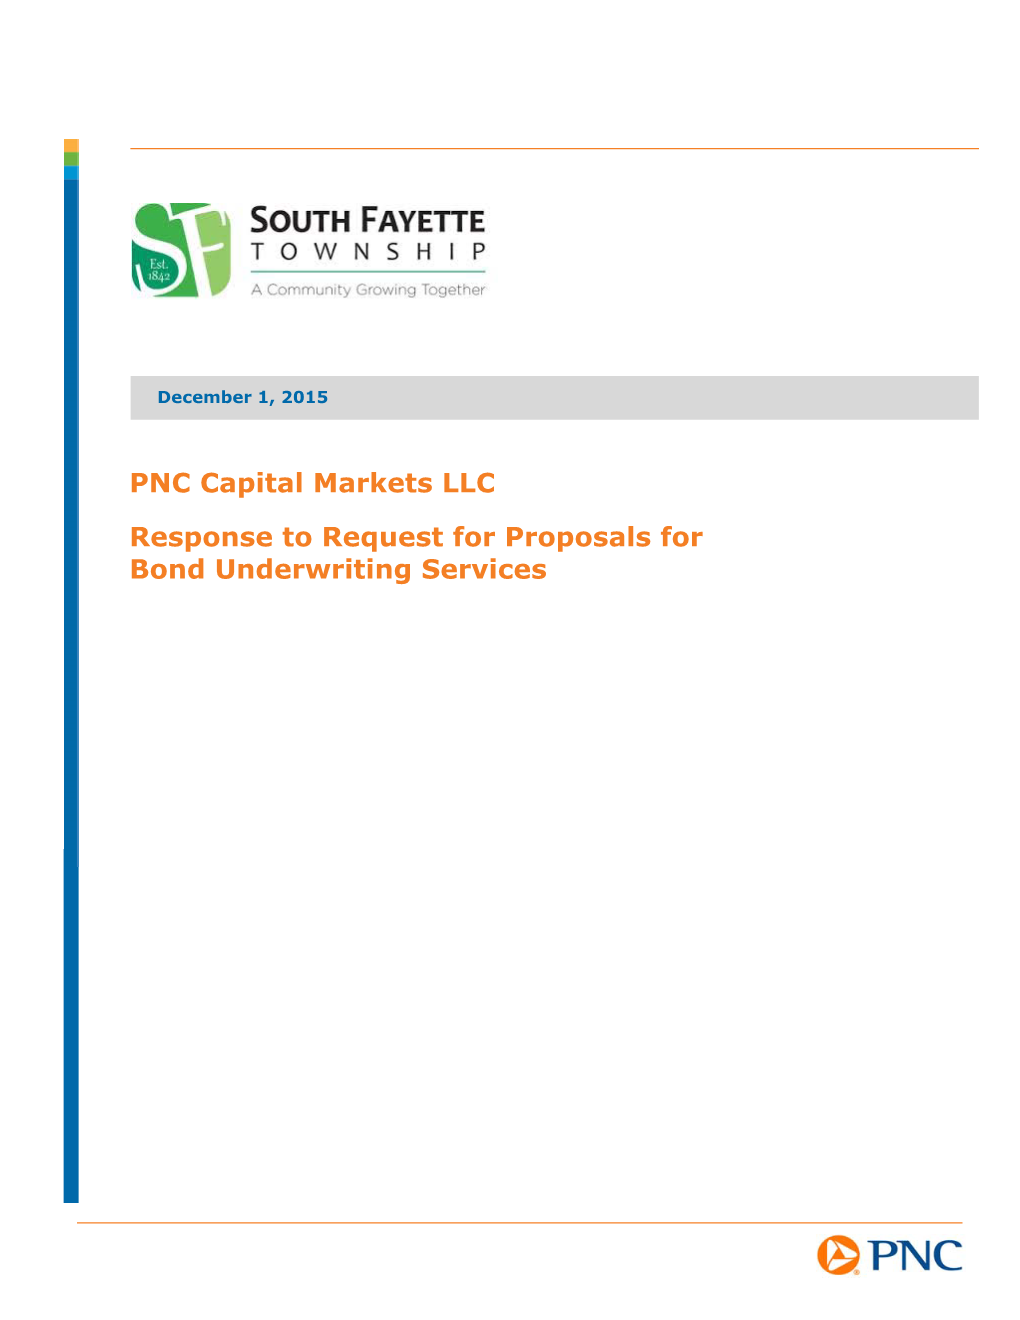 PNC Capital Markets LLC Response to Request for Proposals for Bond